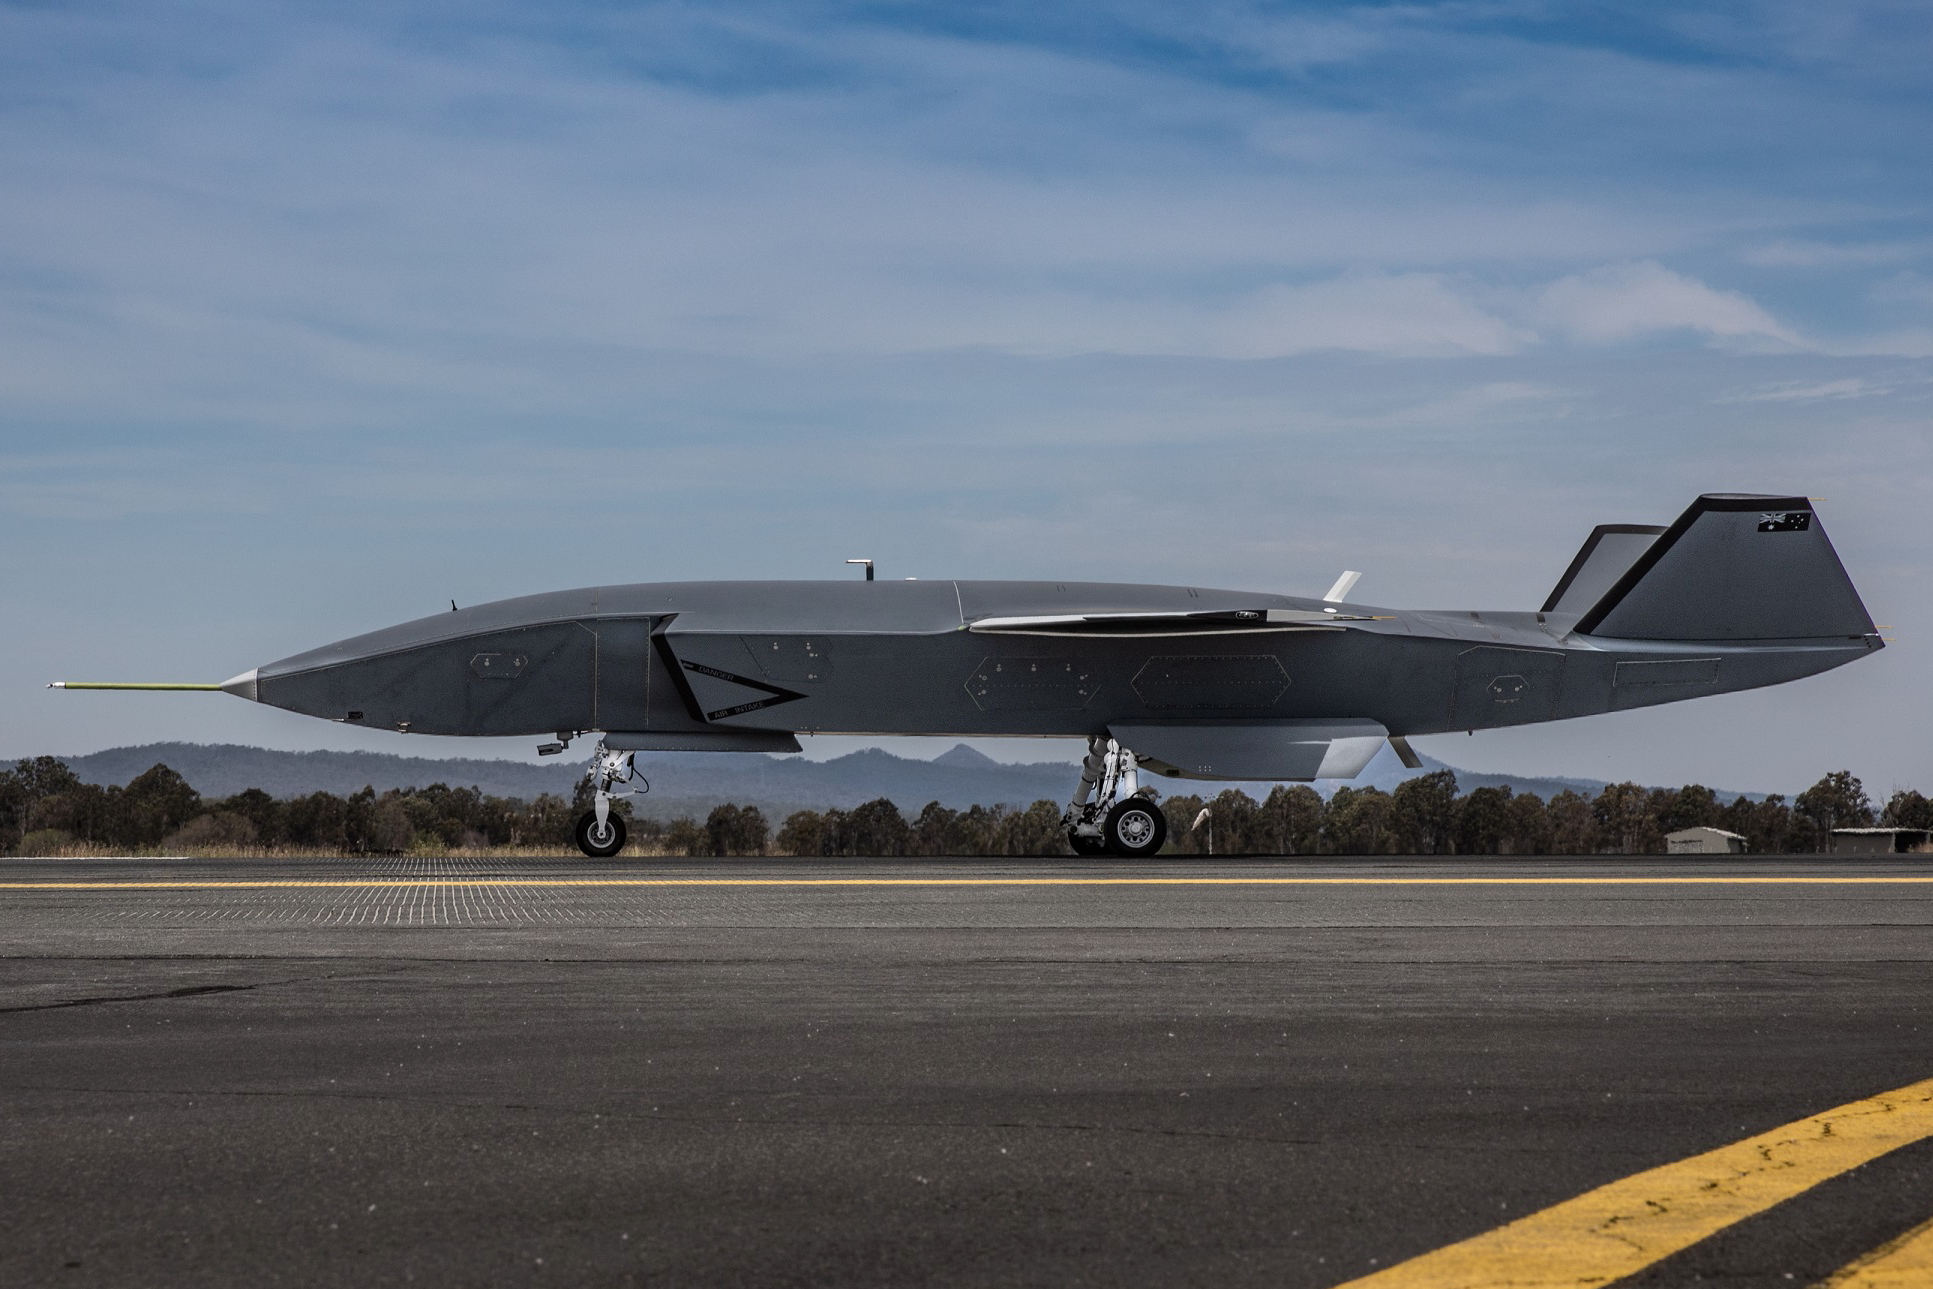 The Boeing Loyal Wingman aircraft being developed in partnership with the Royal Australian Air Force (RAAF) recently moved under its own power for the first time, a key milestone for the aircraft that’s expected to make its first flight this year. Click to enlarge.